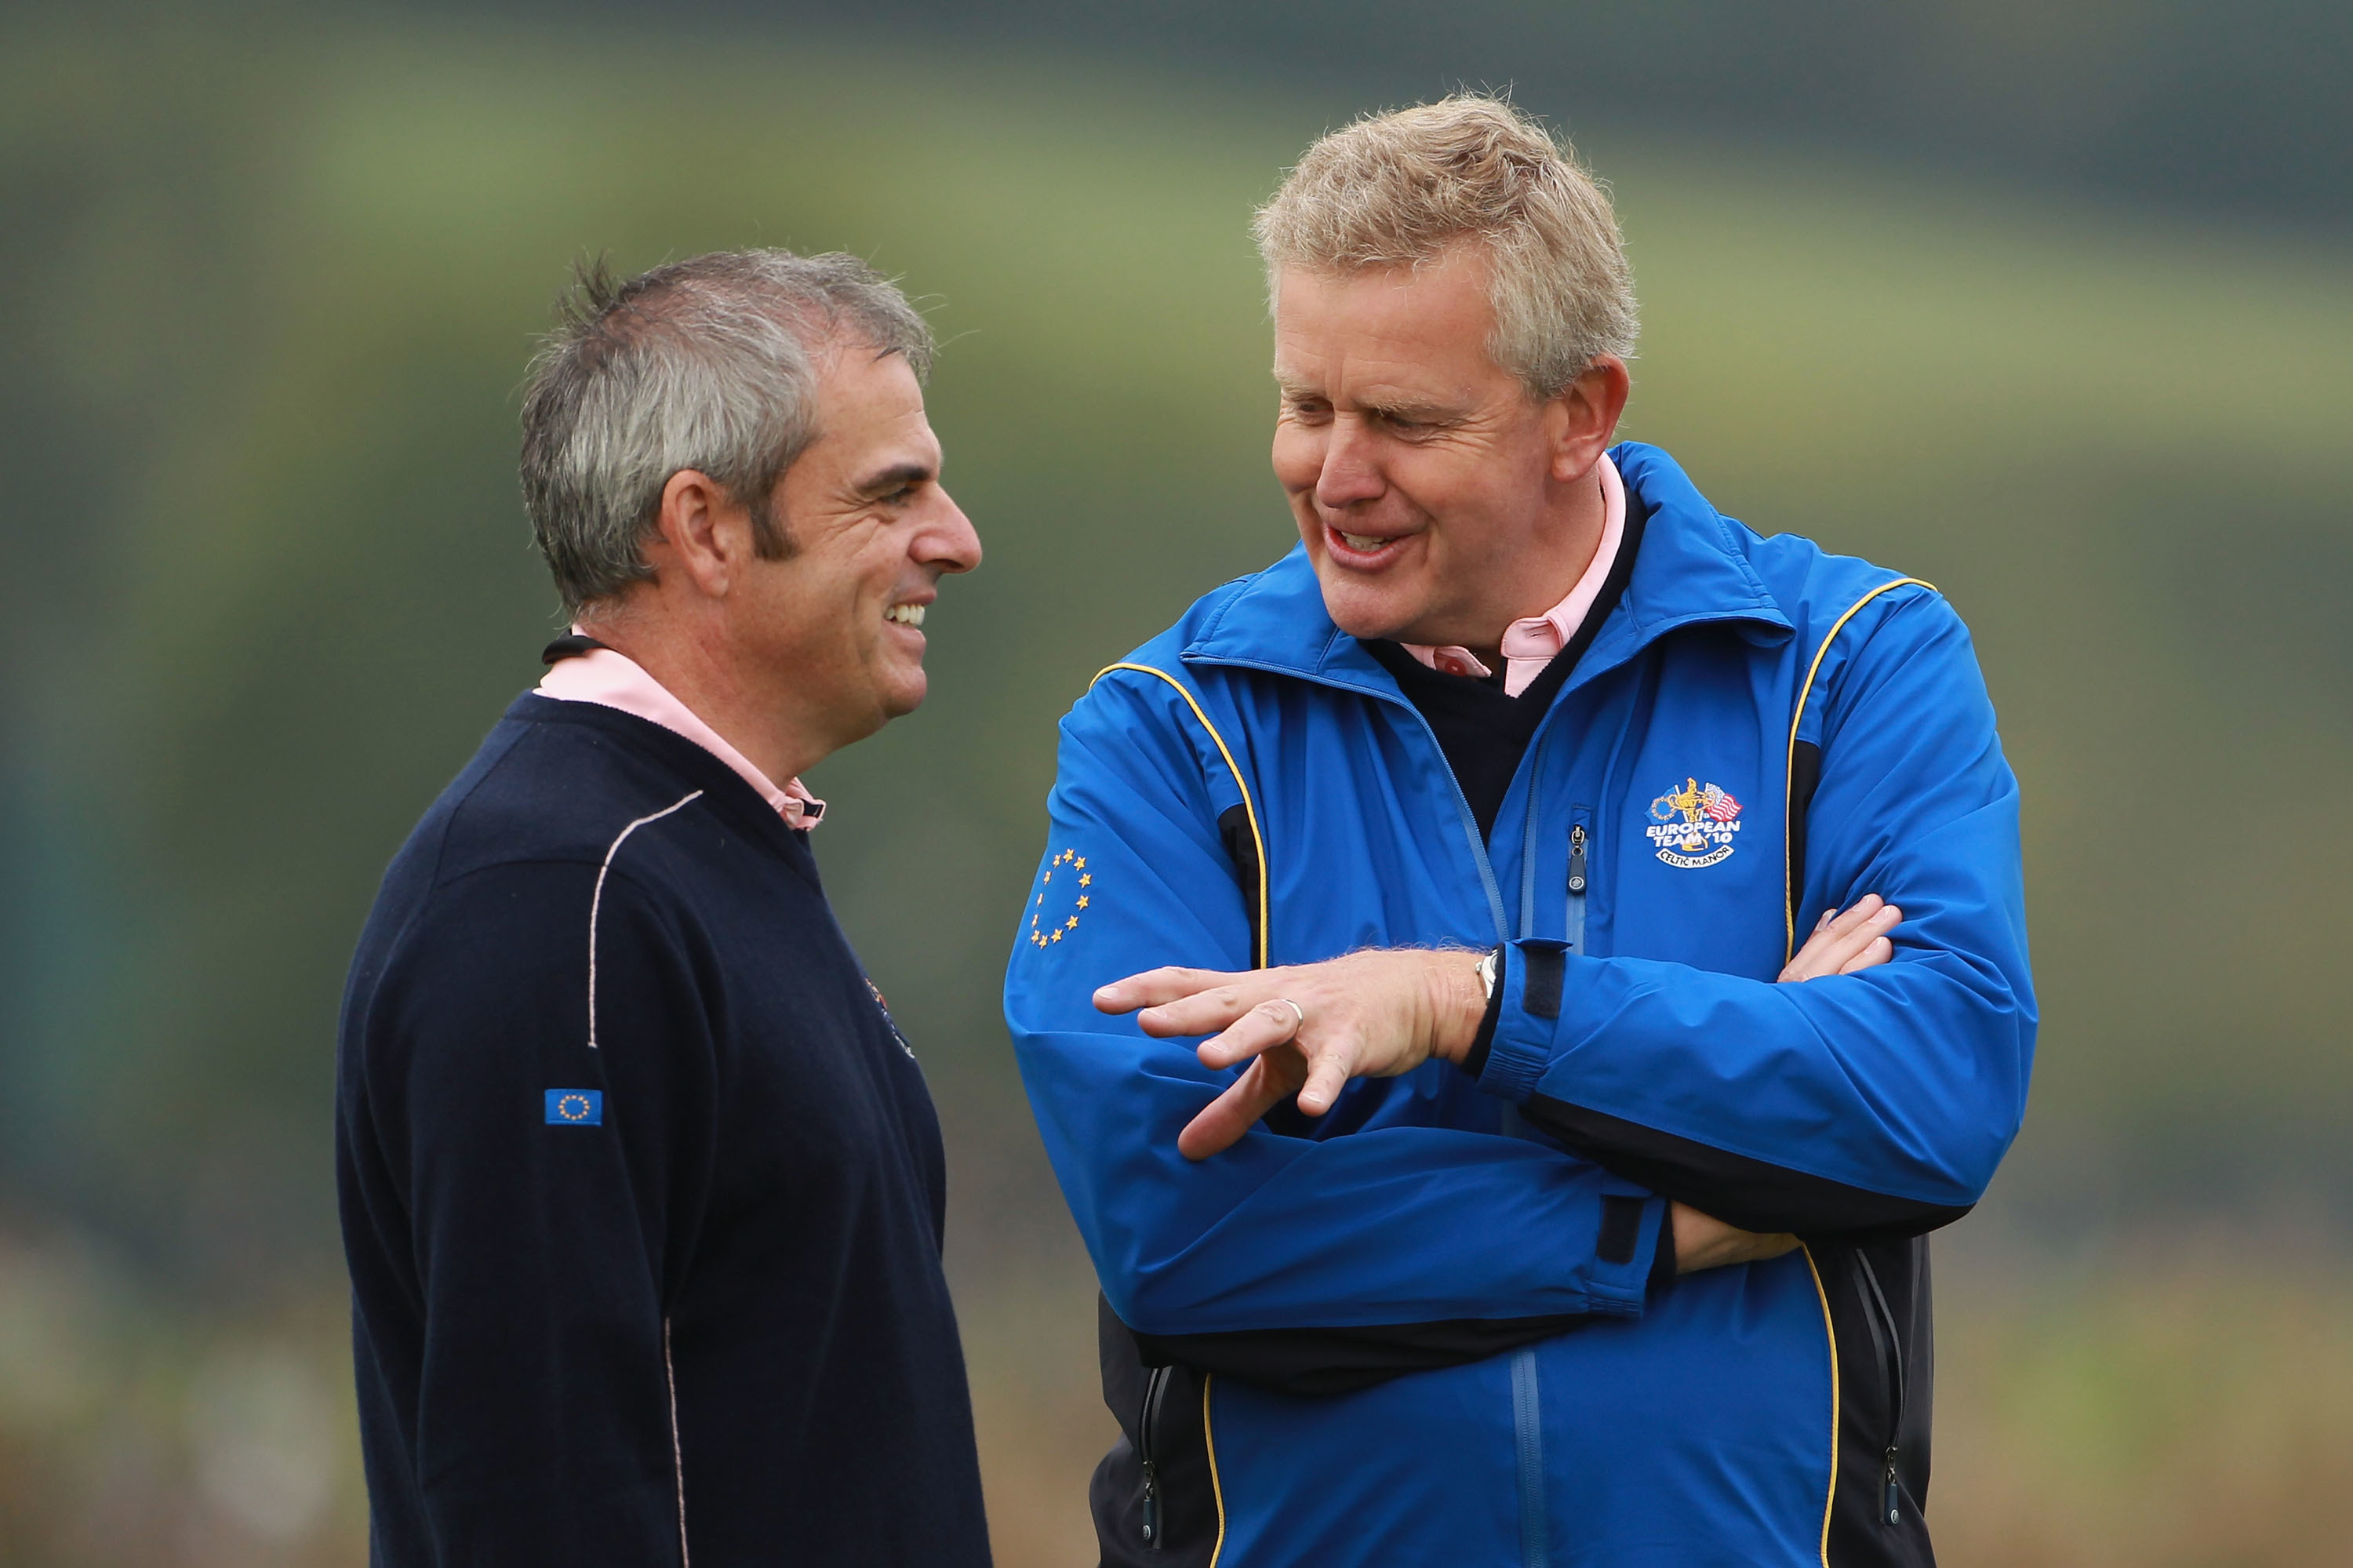 Colin Montgomerie and Paul McGinley talk tactics at the Ryder Cup at Celtic Manor in 2010.